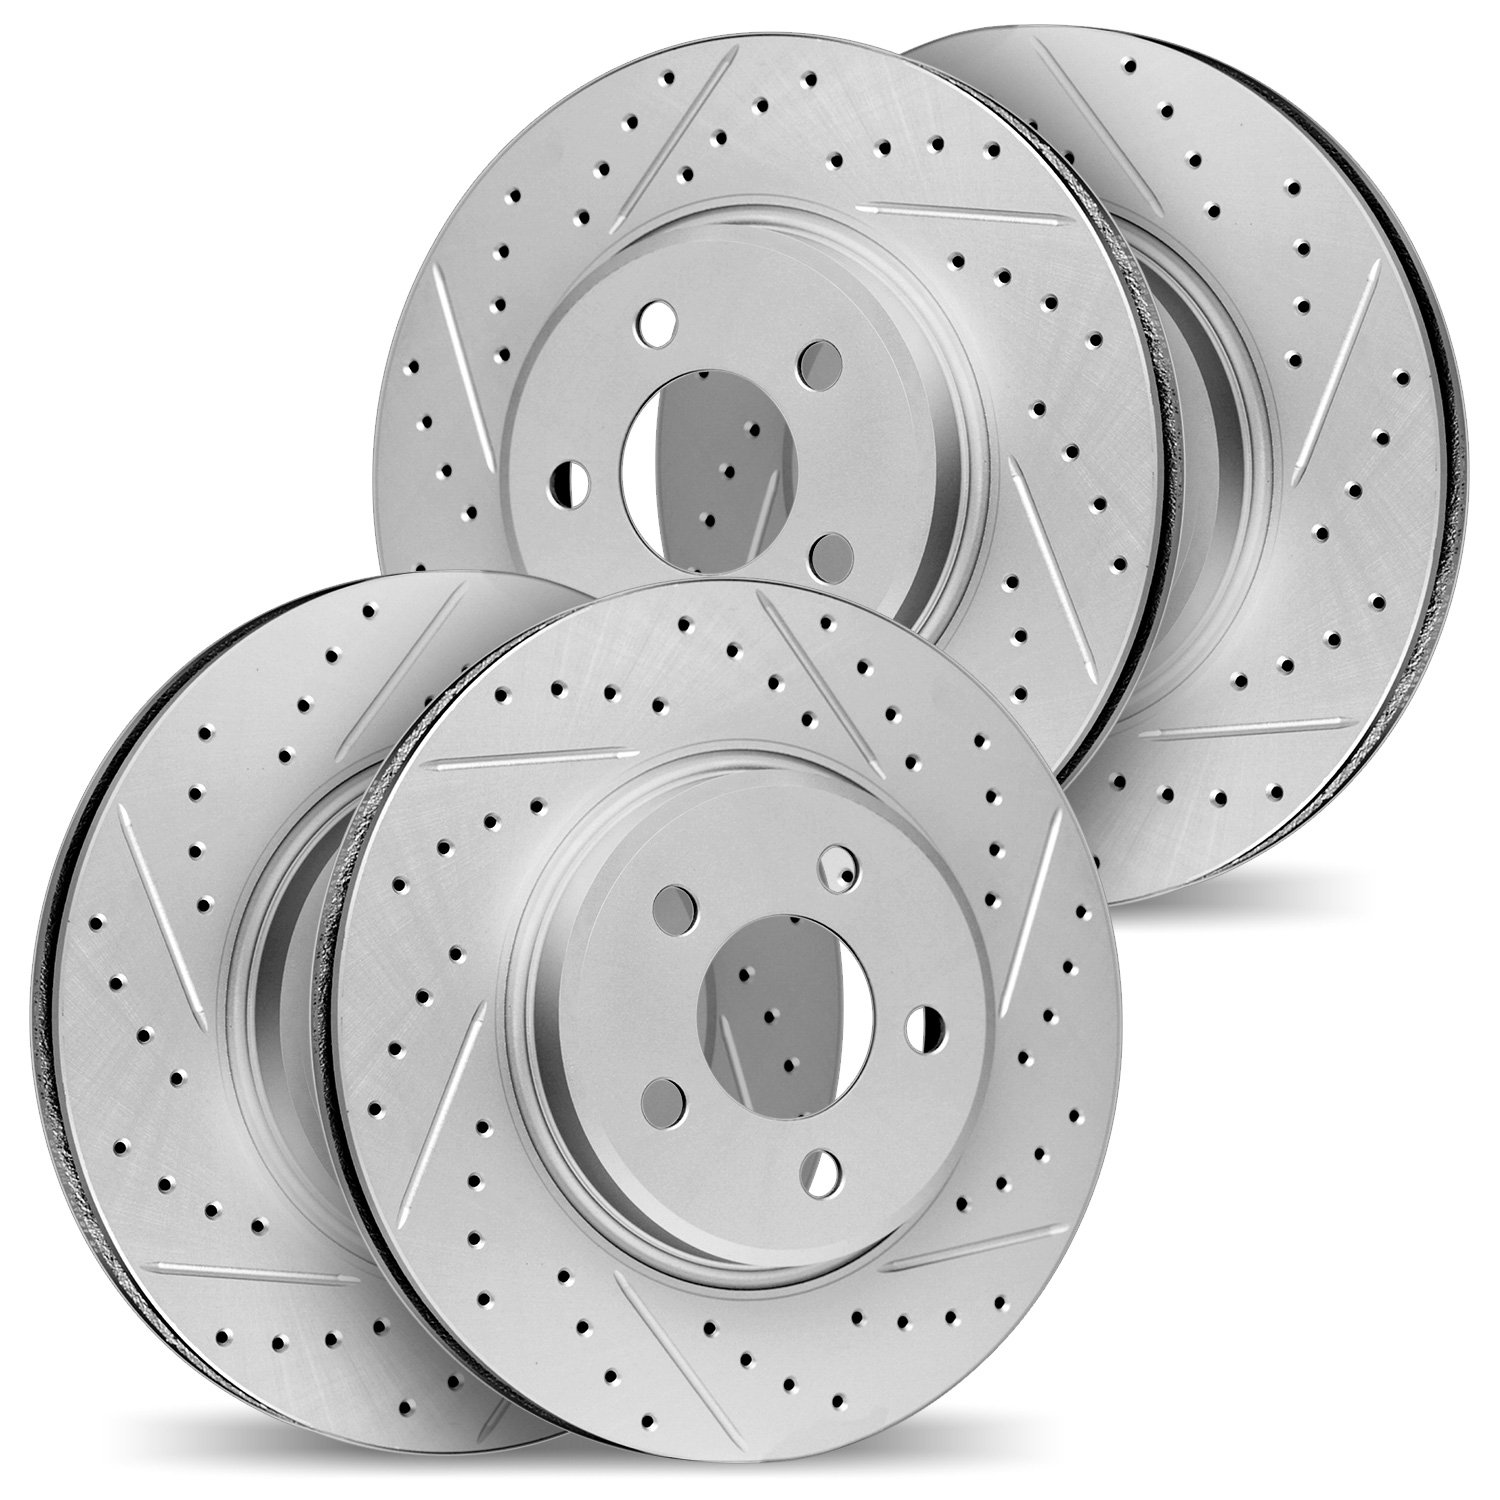 2004-75004 Geoperformance Drilled/Slotted Brake Rotors, 1992-2000 Lexus/Toyota/Scion, Position: Front and Rear